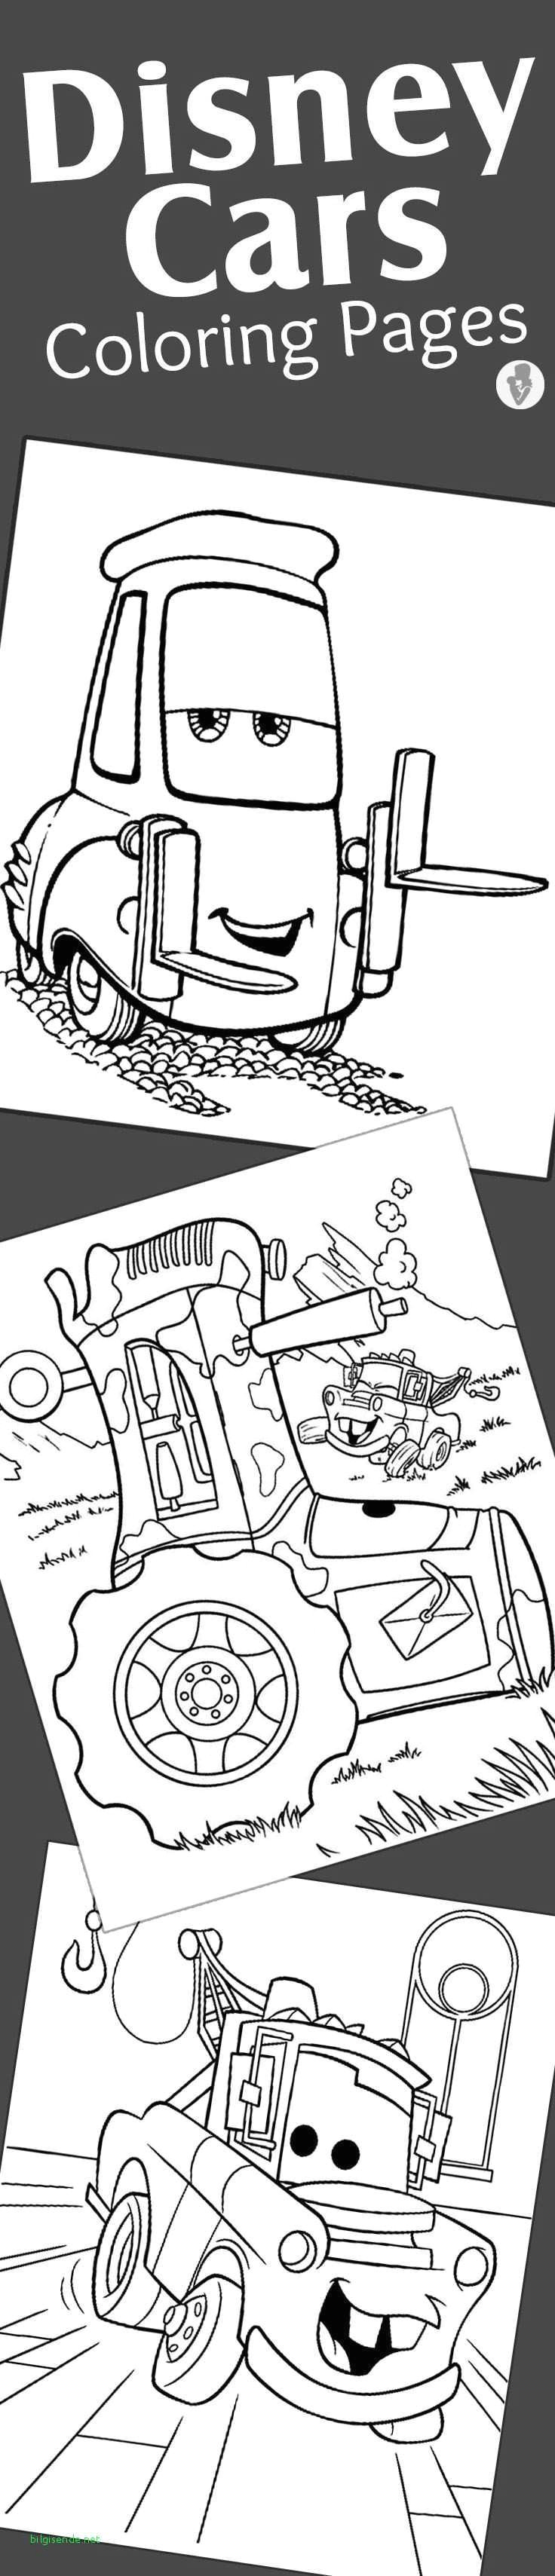 Drawing A Cartoon Car Easy Car Drawing Images Neverending Info